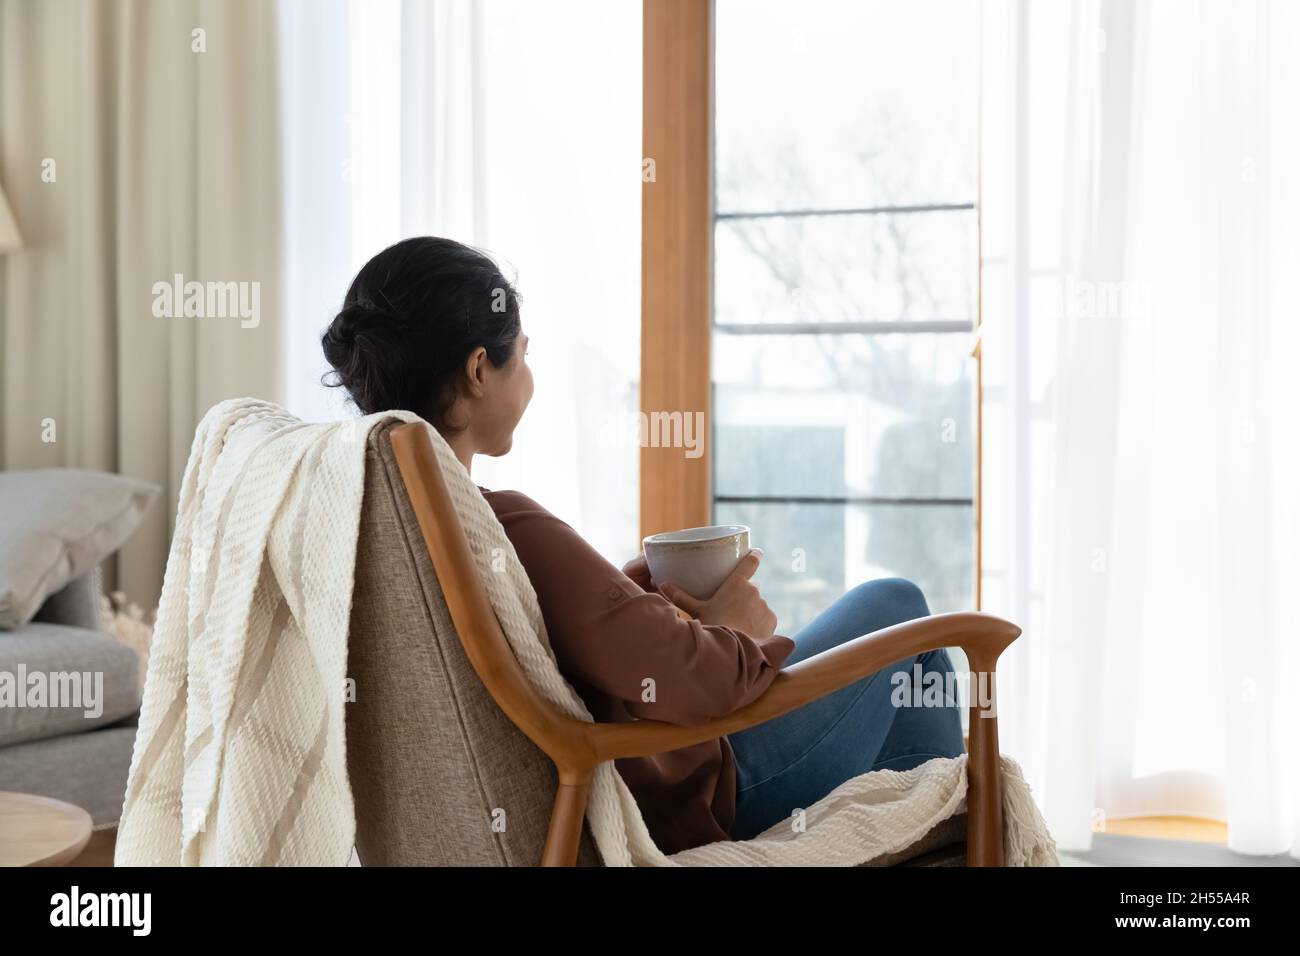 Calm Indian woman relax on comfy armchair with tea cup Stock Photo